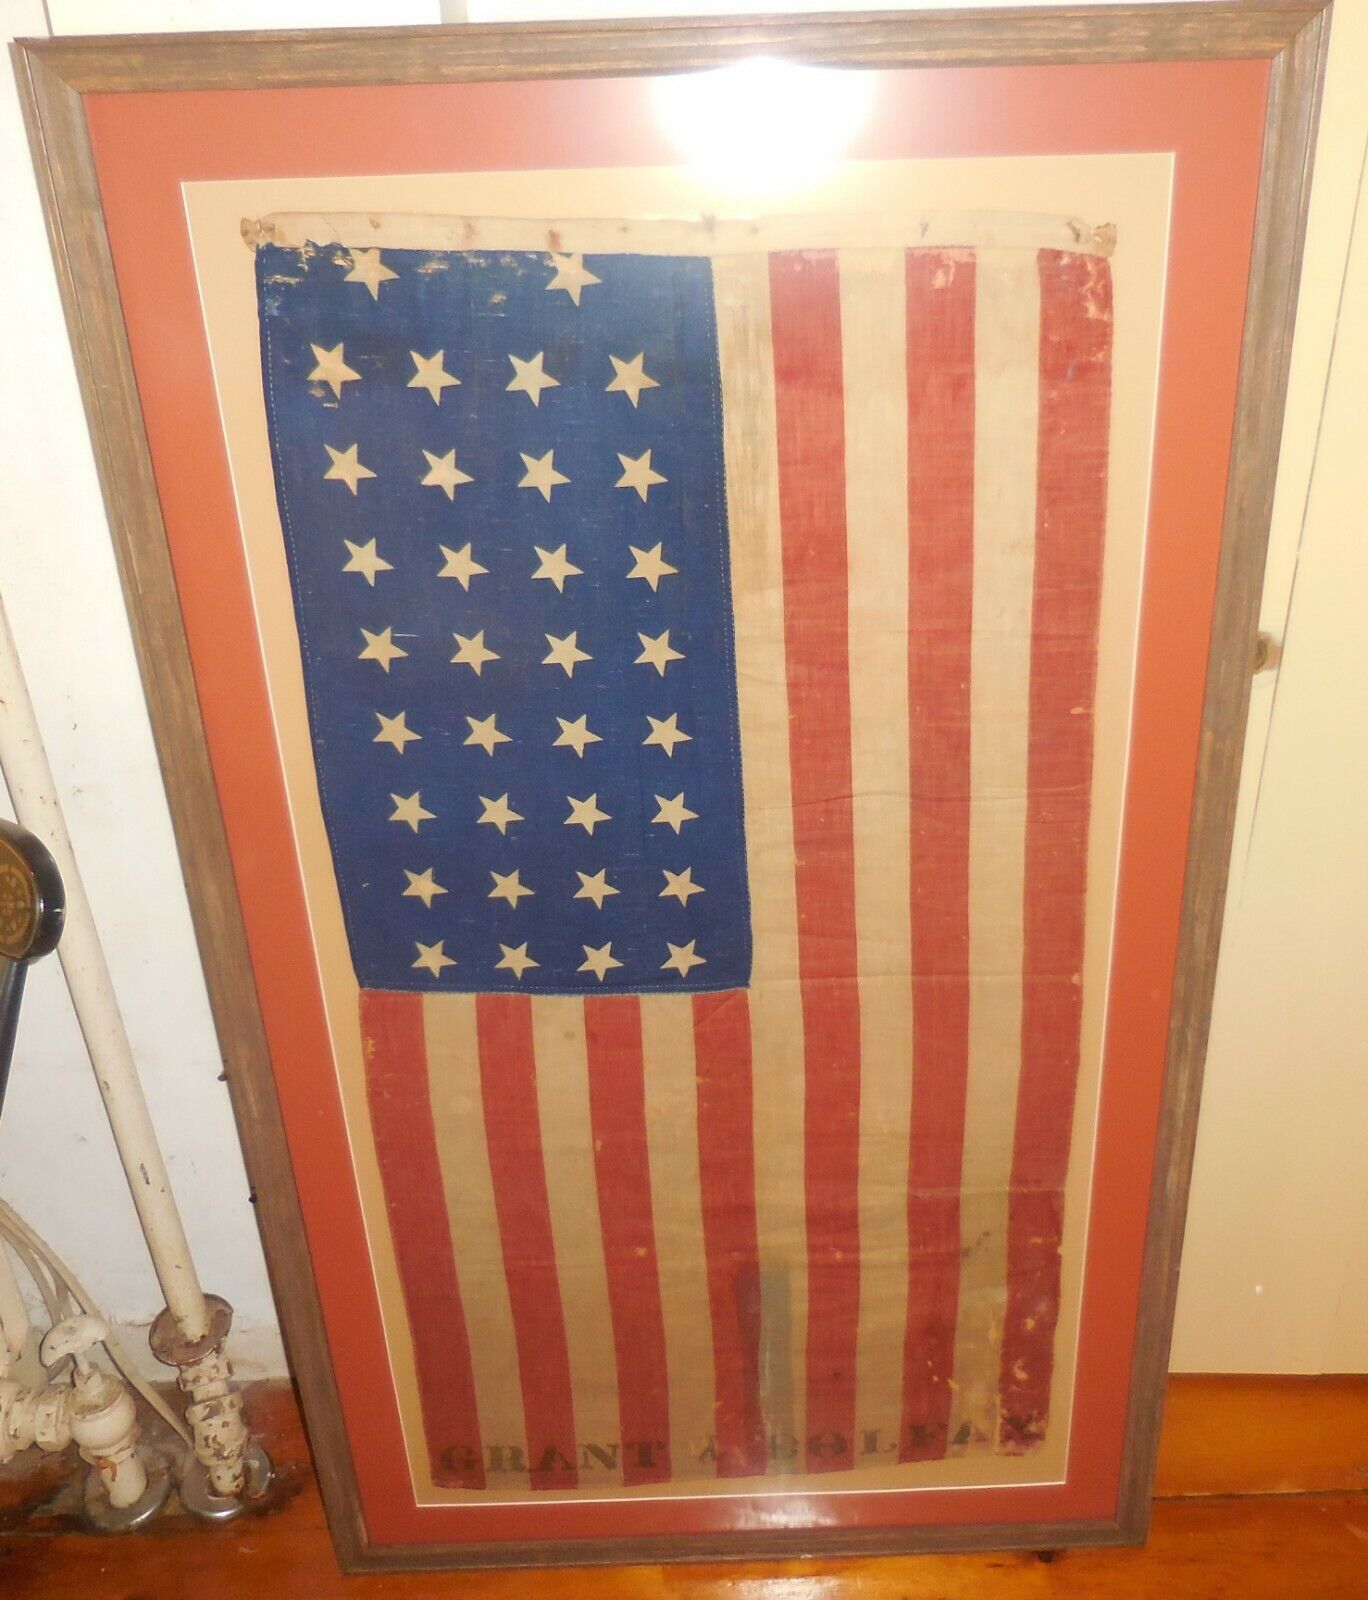 34 Star Grant & Colfax Vintage American Antique Flag Matted and Framed 